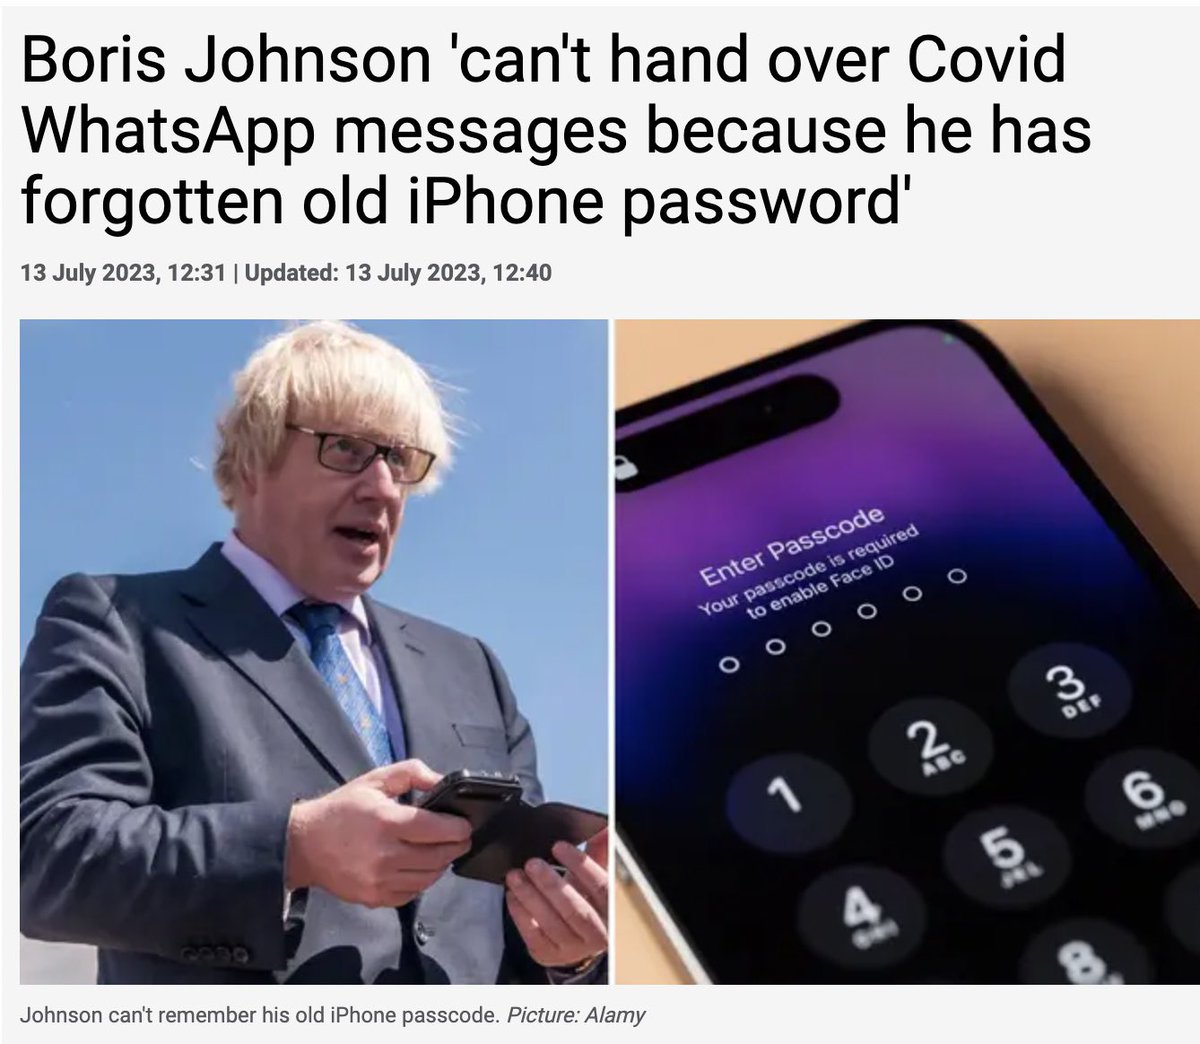 Oh, Boris Johnson’s forgotten his phone password and conveniently can’t get into his WhatsApp messages for the inquiry, eh?

*turns head to look at camera 3*

Hey @covidinquiryuk 

Try 30111874

That’s Churchill’s birthday.

Now don’t be bothering me any more: I’m busy. https://t.co/v1RiOUrtA7